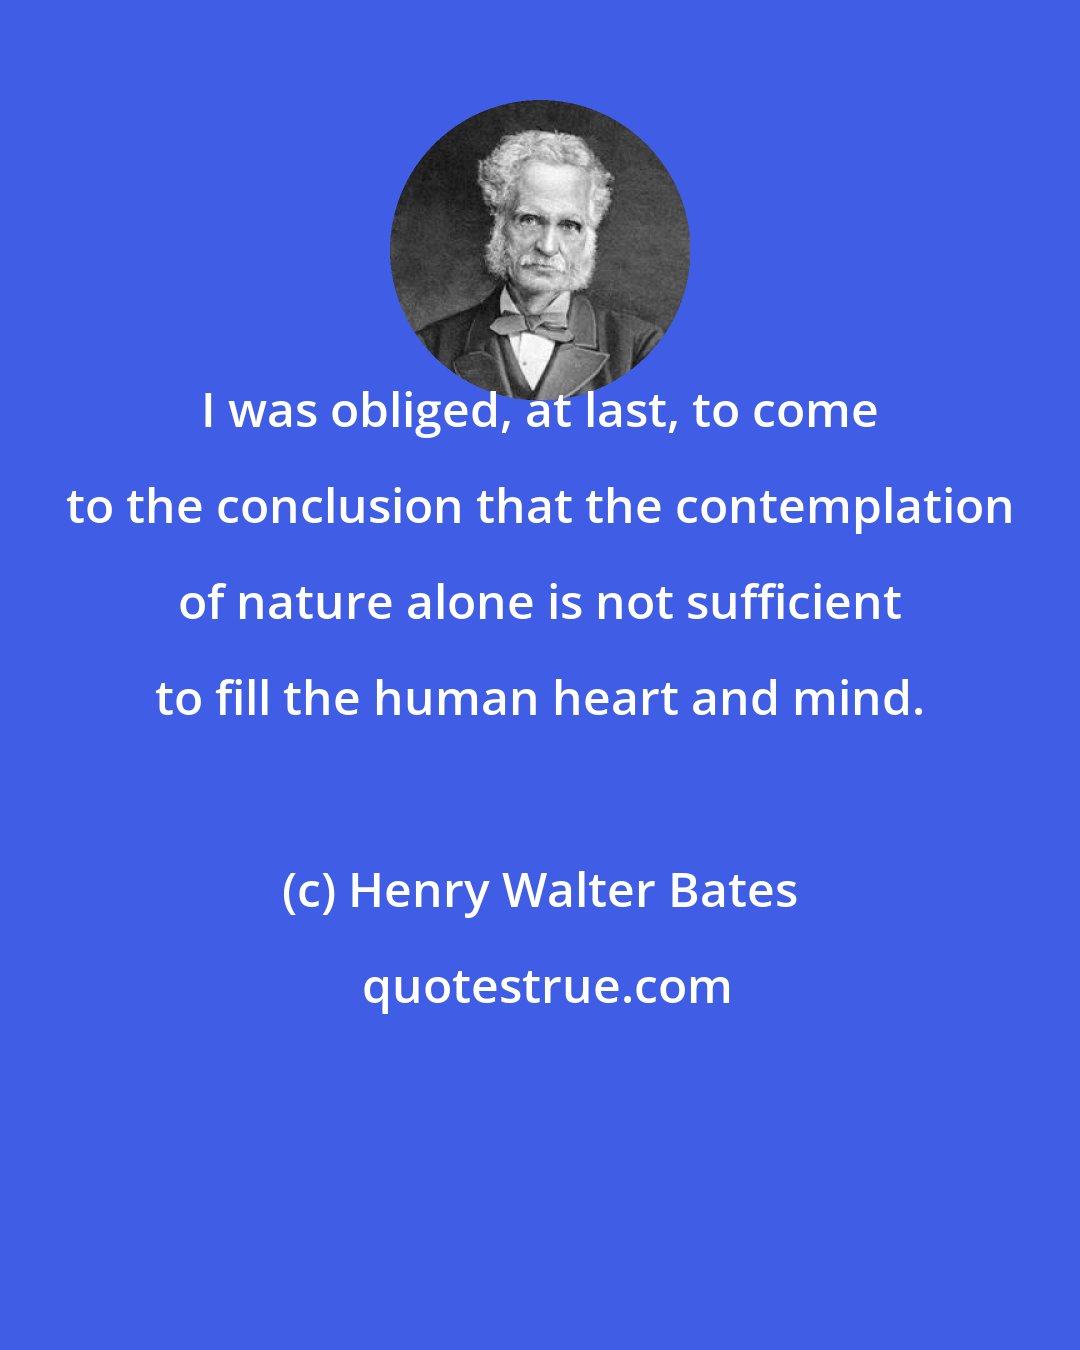 Henry Walter Bates: I was obliged, at last, to come to the conclusion that the contemplation of nature alone is not sufficient to fill the human heart and mind.